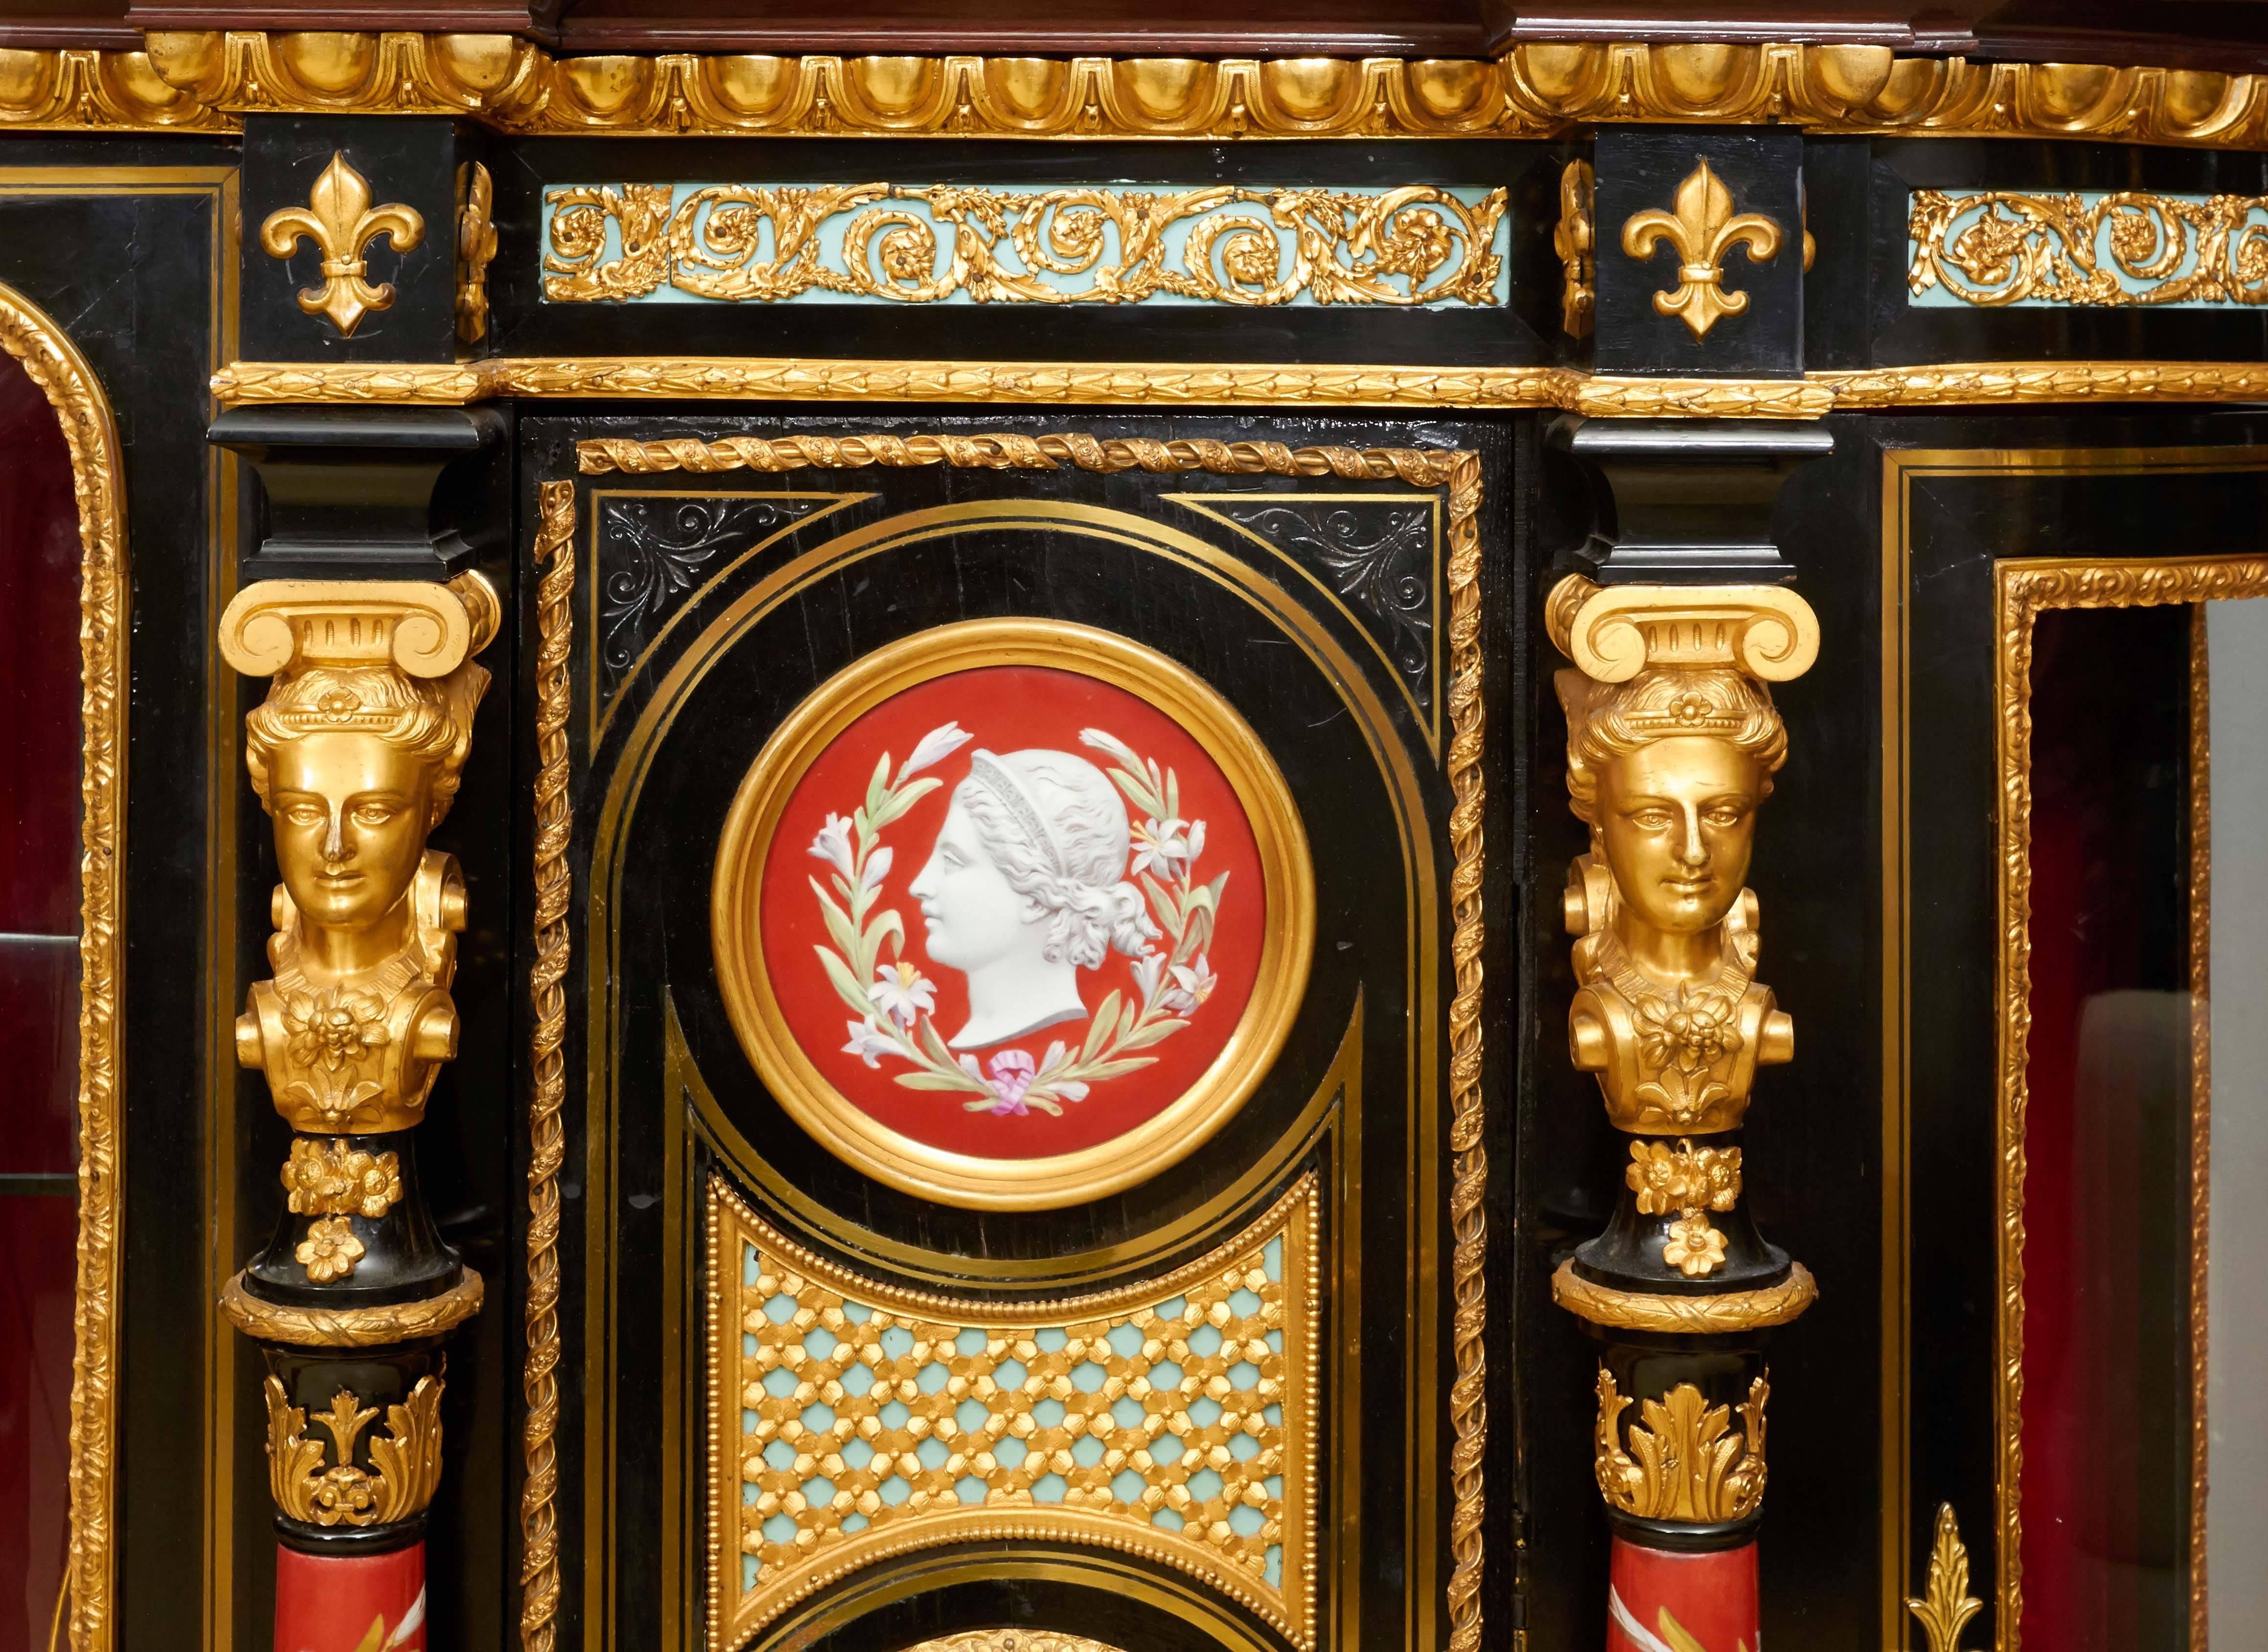 A highly important ormolu-mounted KPM Porcelain cabinet, attributed to Gillows of Lancaster and London, also known as Gillows & Co.

Late 19th century.

Brass inlaid, superb quality ormolu bronze mounts, hand-painted KPM porcelain plaques,